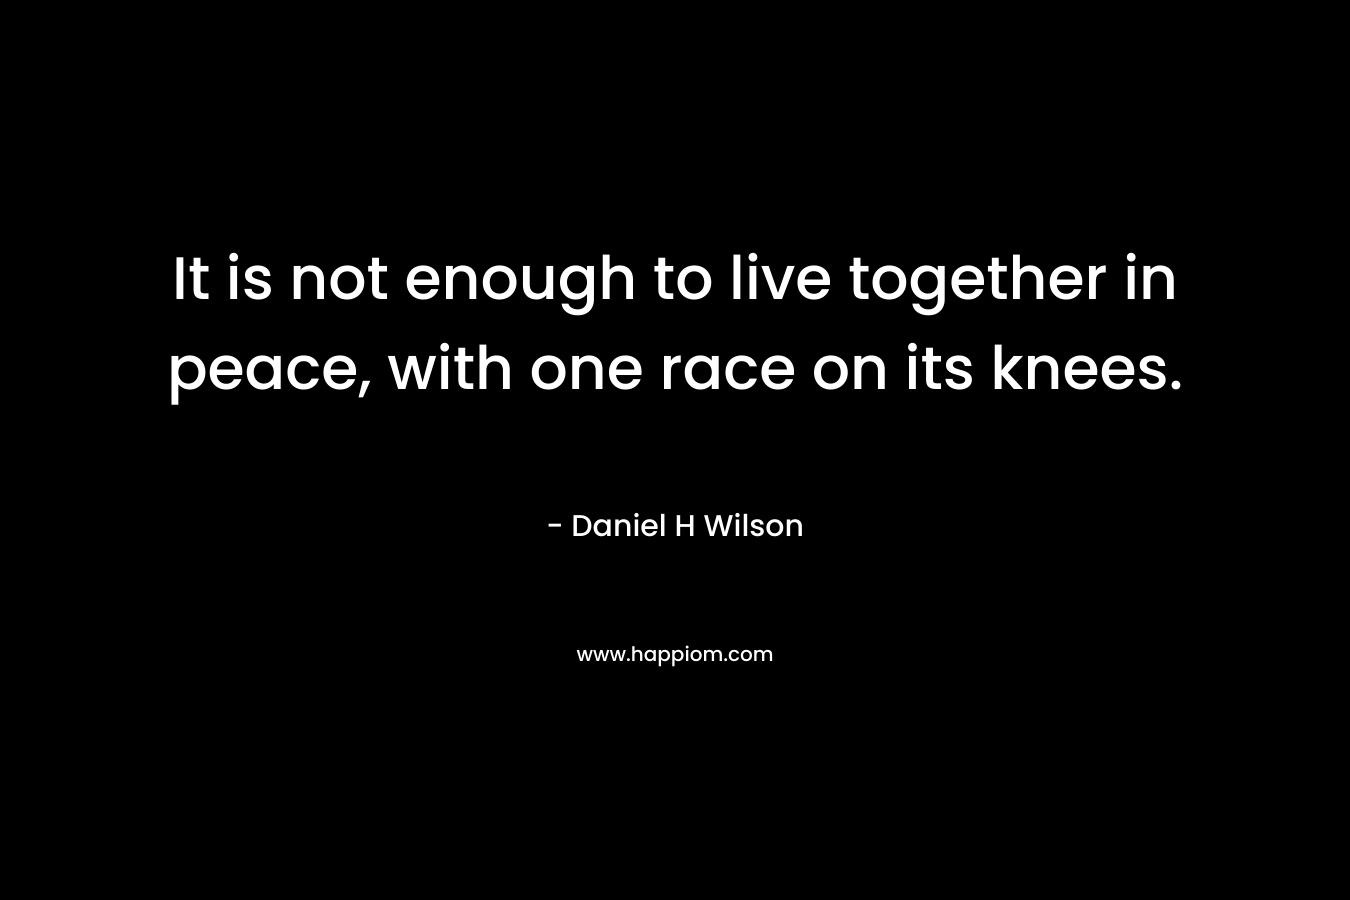 It is not enough to live together in peace, with one race on its knees.